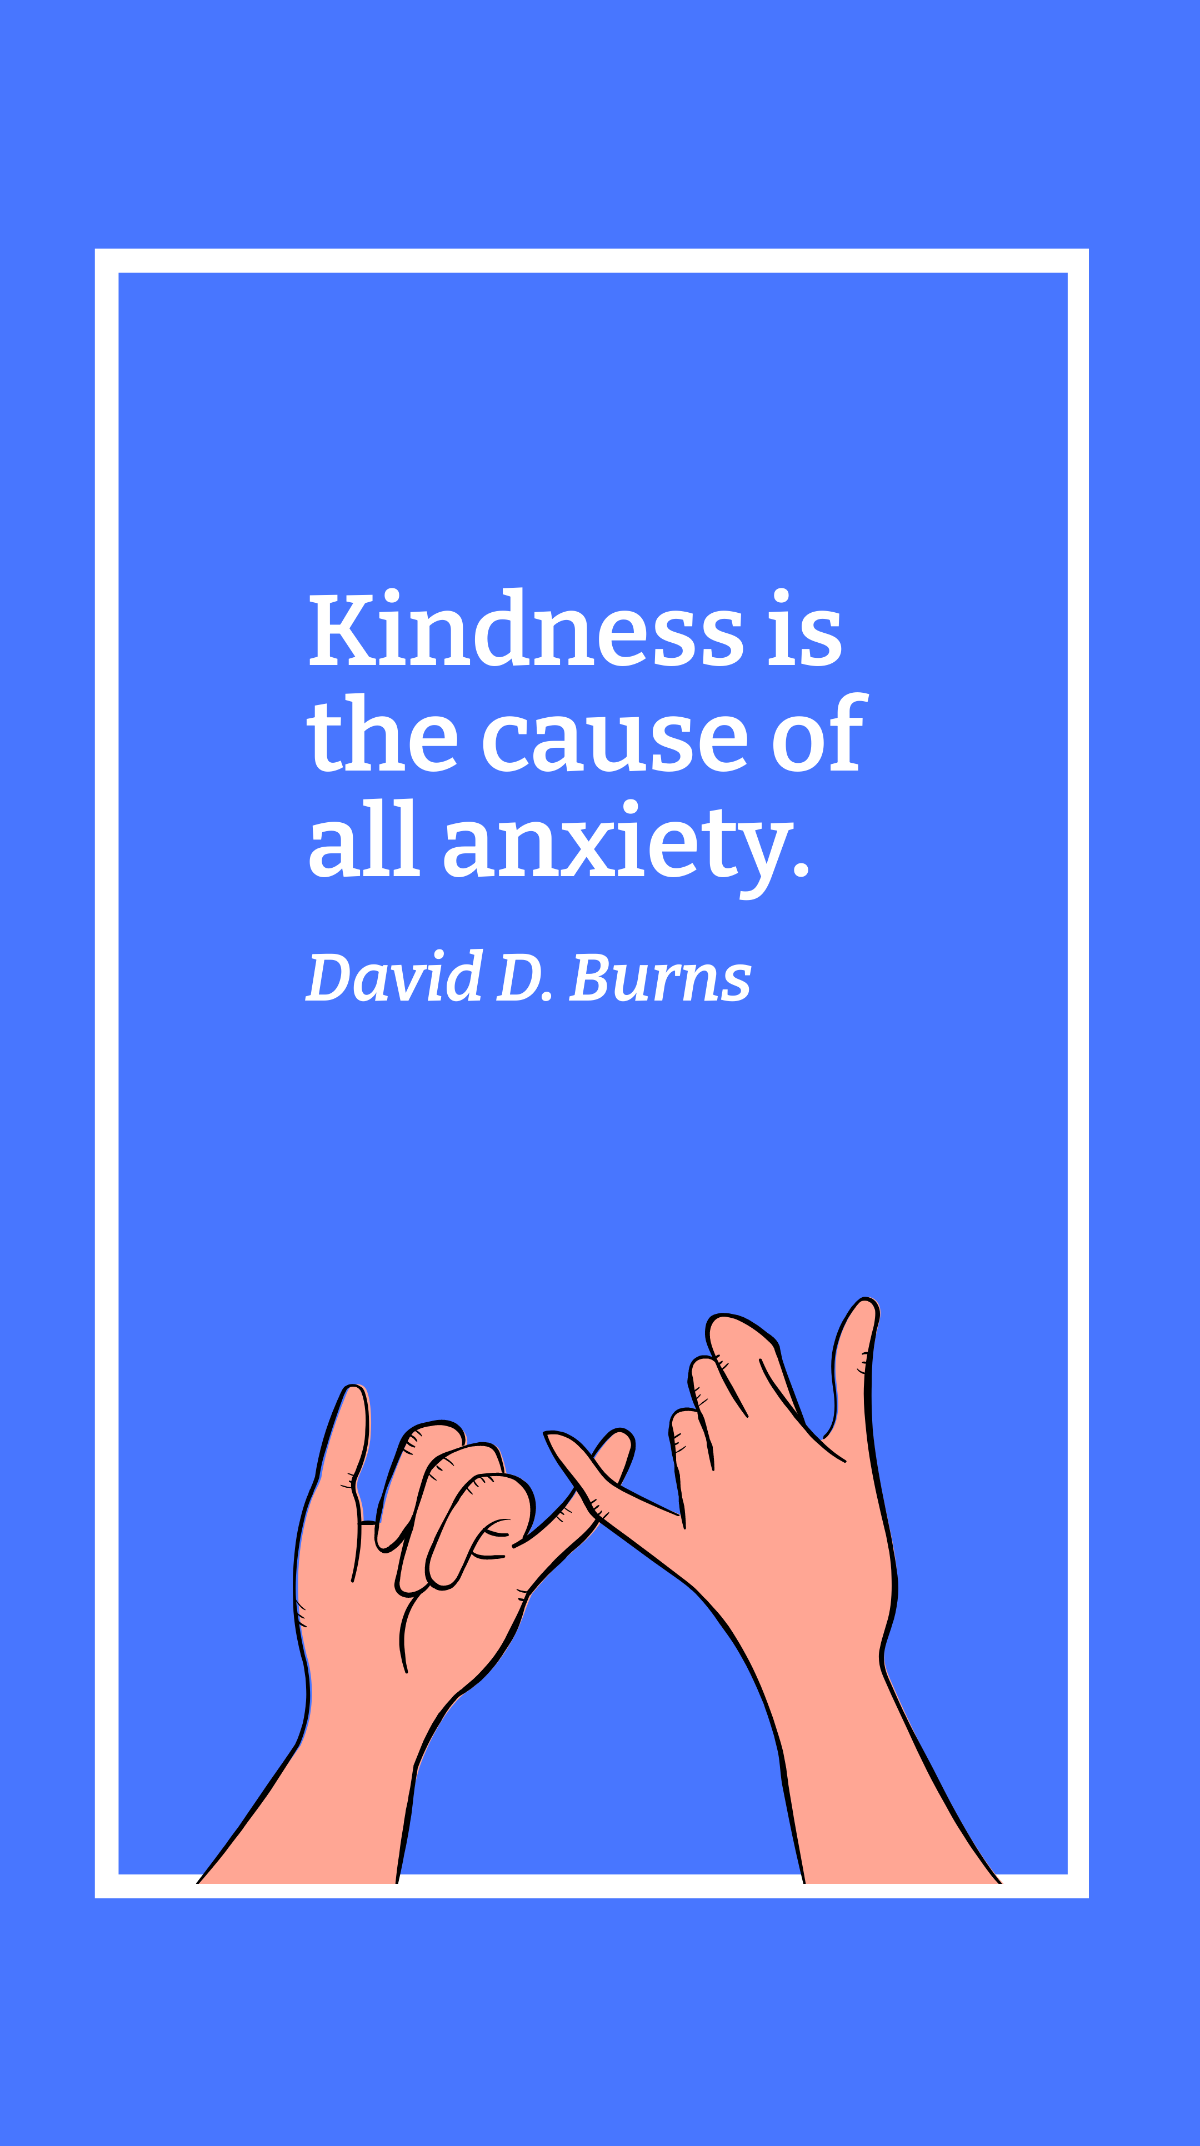 David D. Burns - Kindness is the cause of all anxiety.